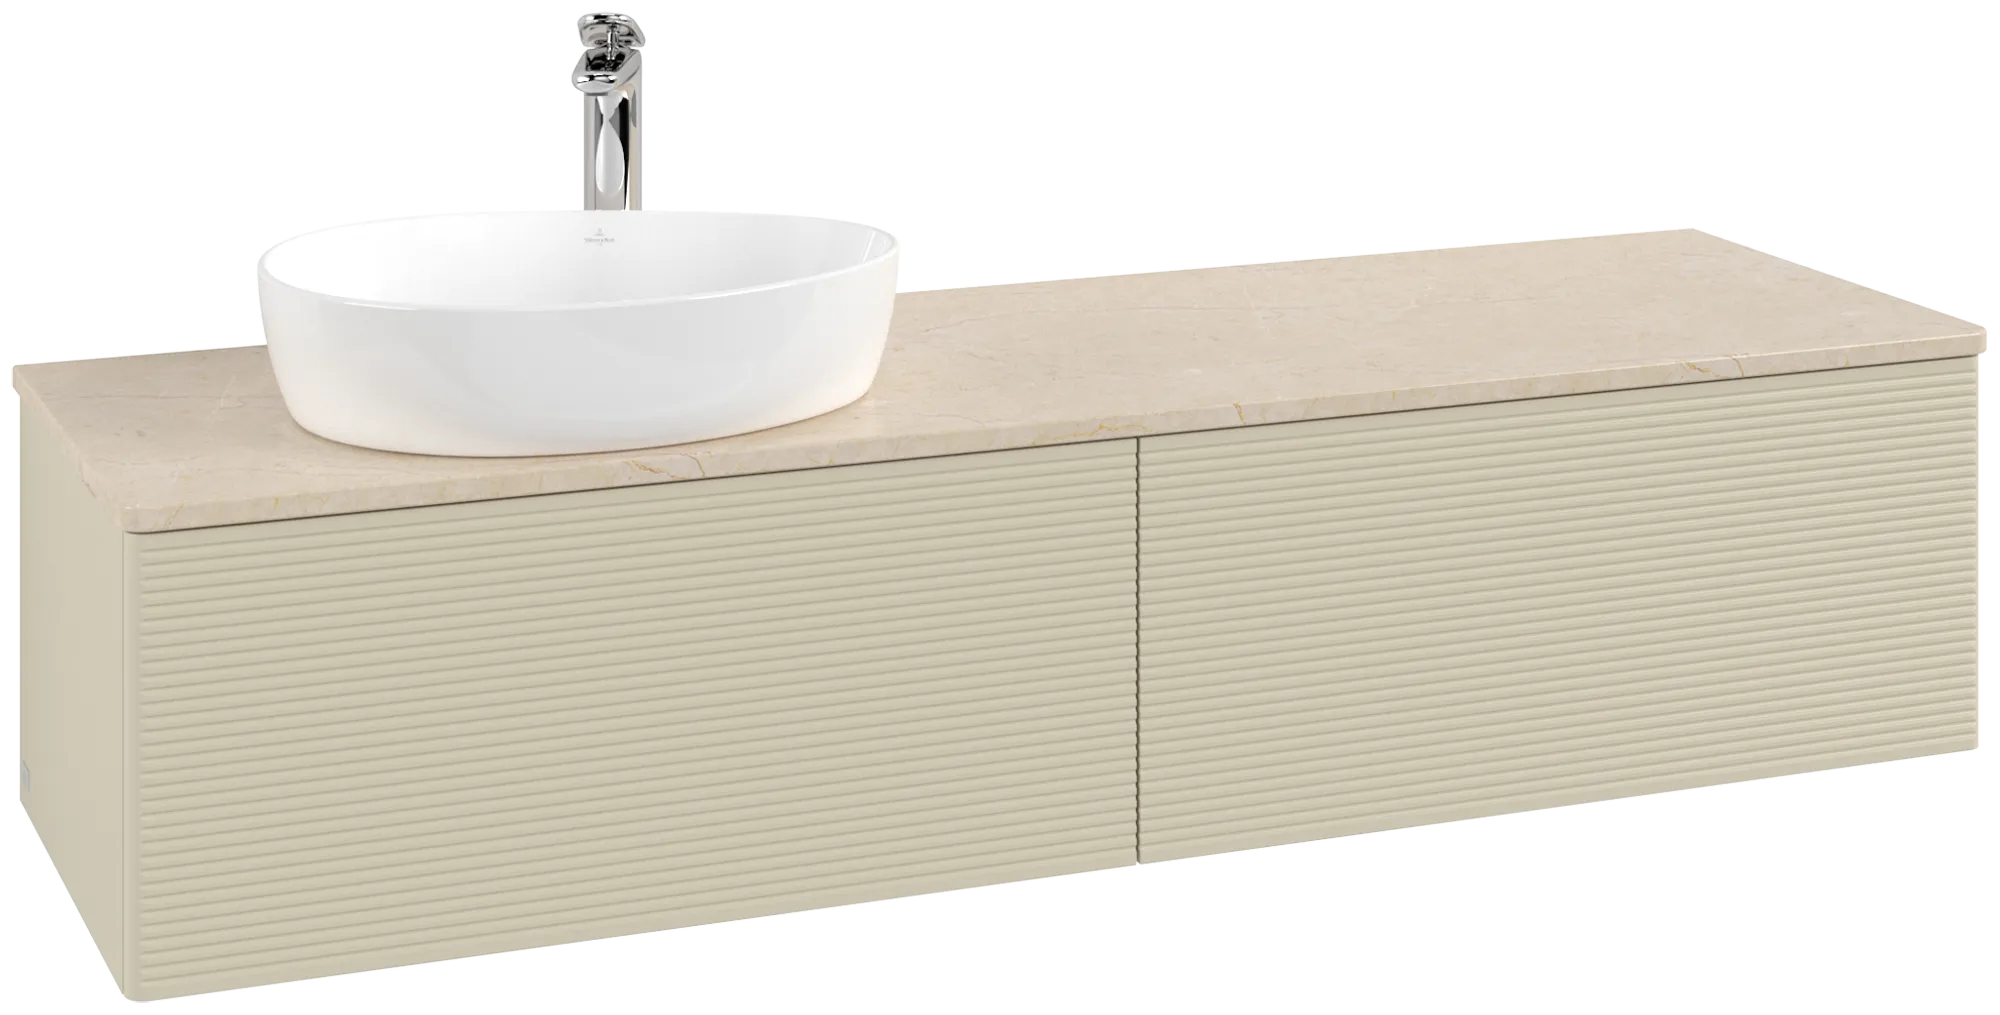 Picture of VILLEROY BOCH Antao Vanity unit, 2 pull-out compartments, 1600 x 360 x 500 mm, Front with grain texture, Silk Grey Matt Lacquer / Botticino #K37153HJ